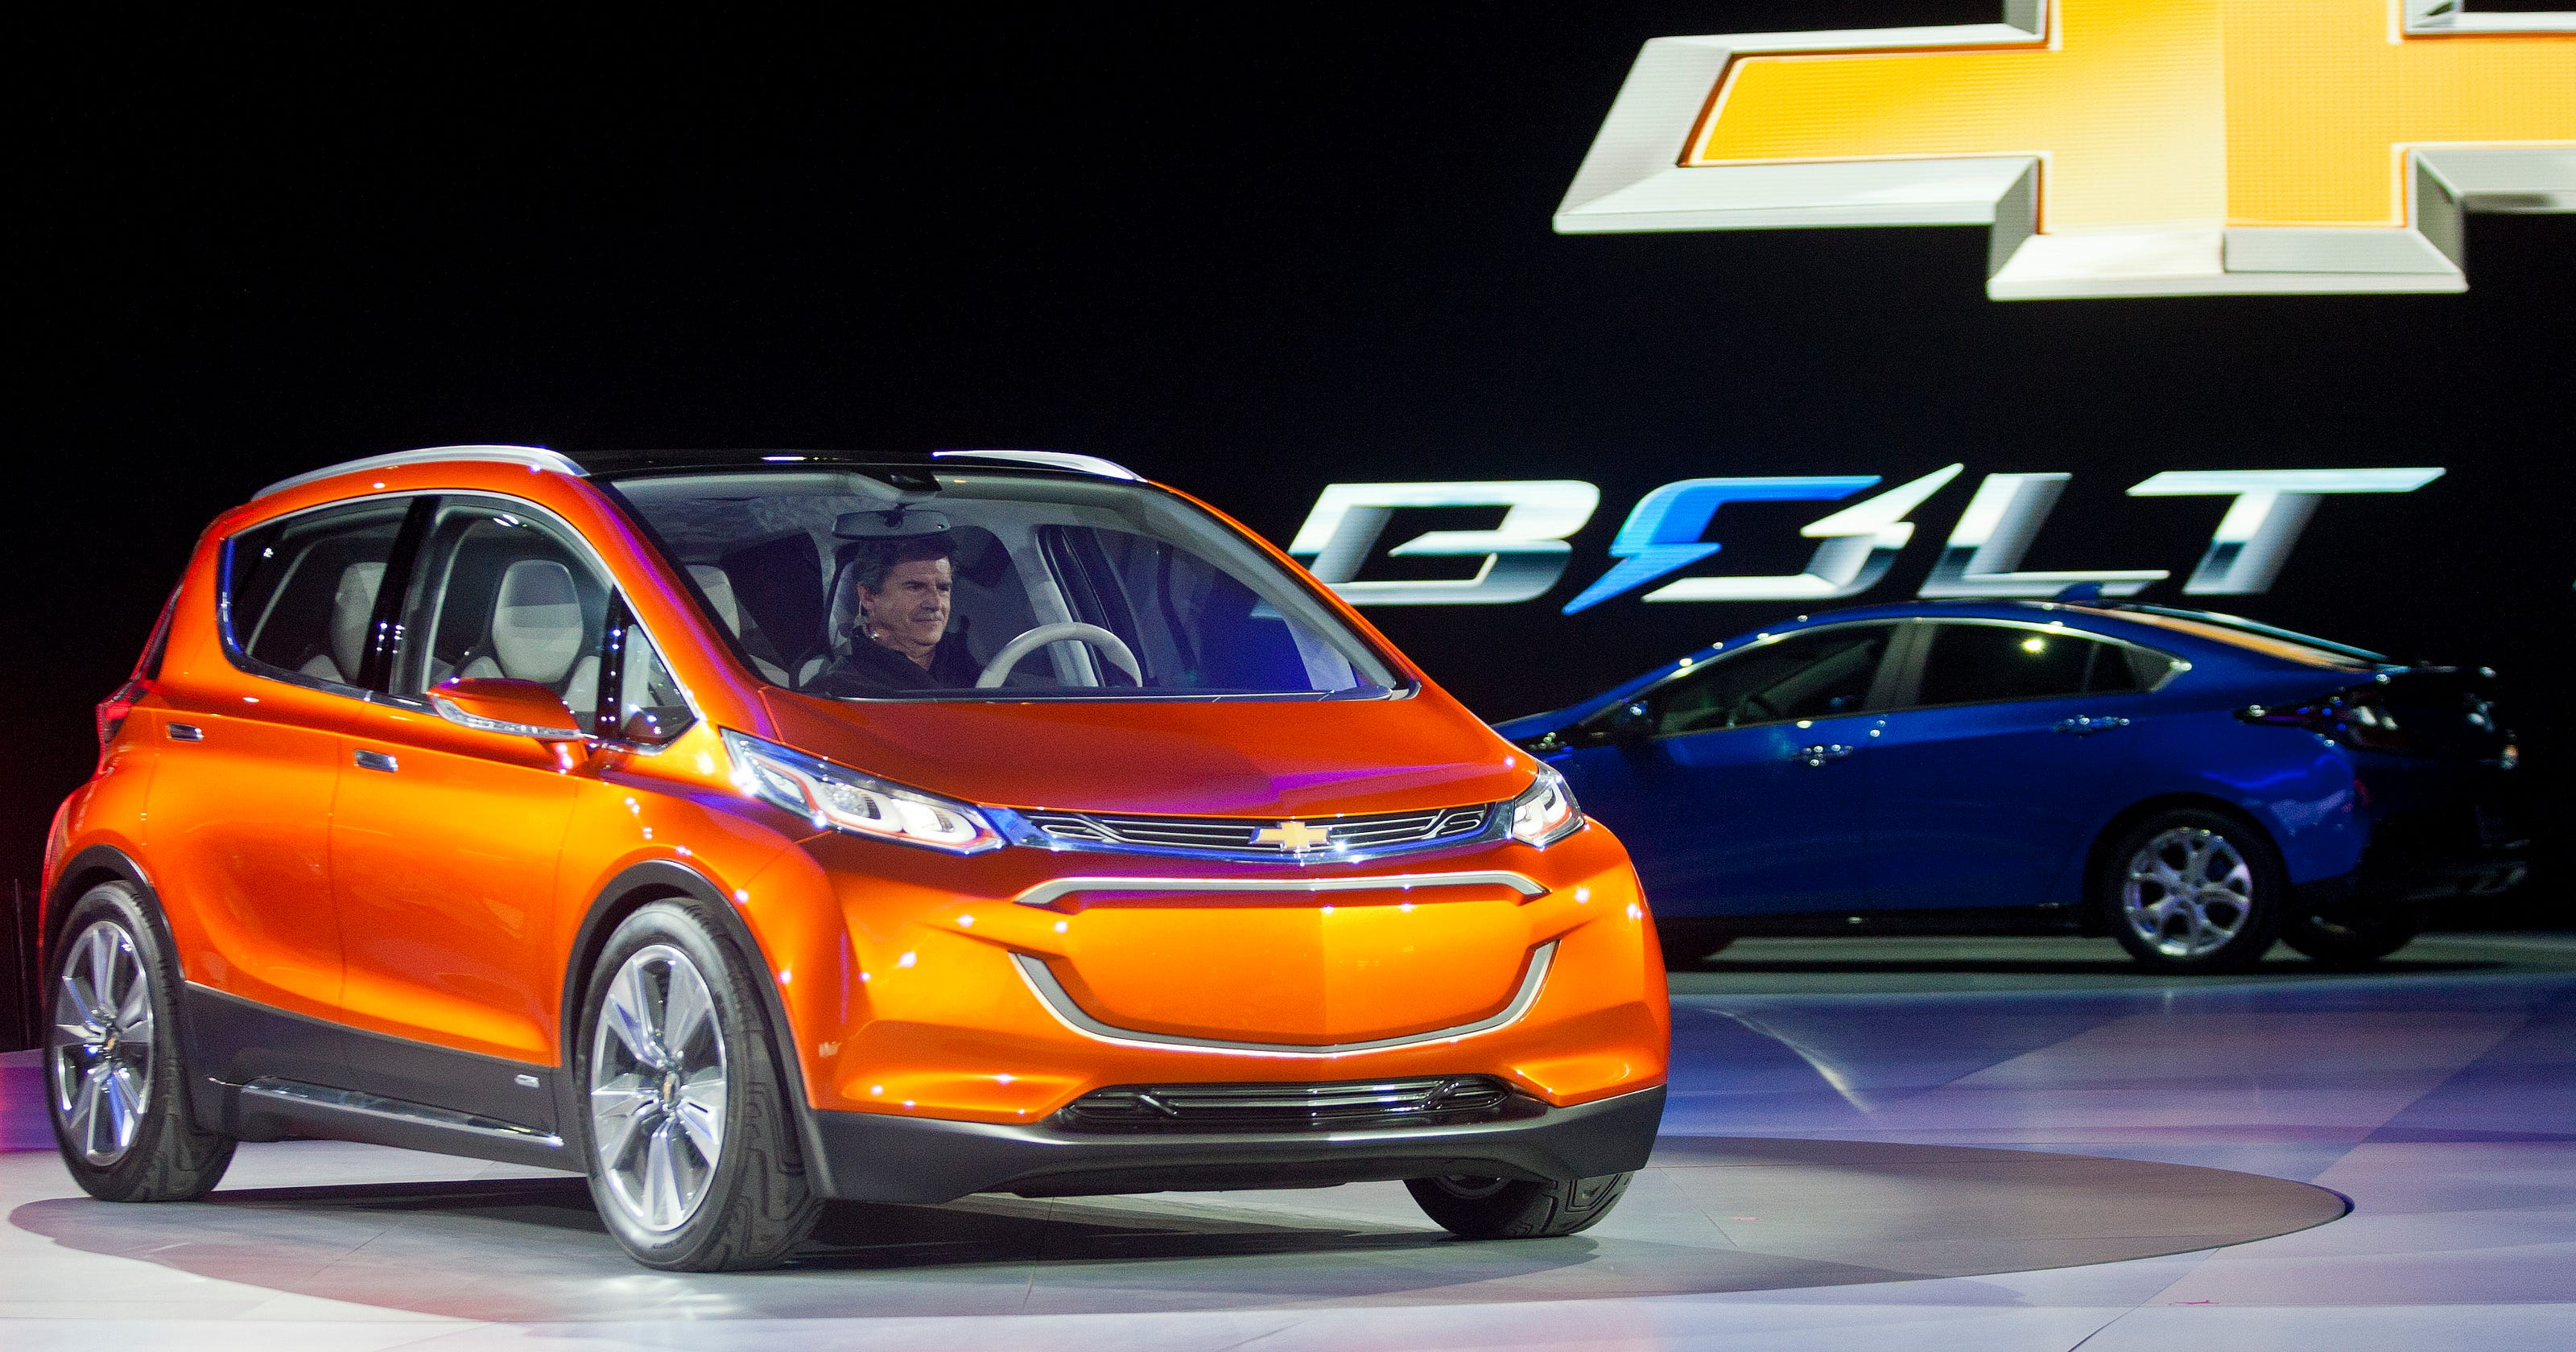 motor-trend-taps-gm-s-electric-vehicle-as-car-of-the-year